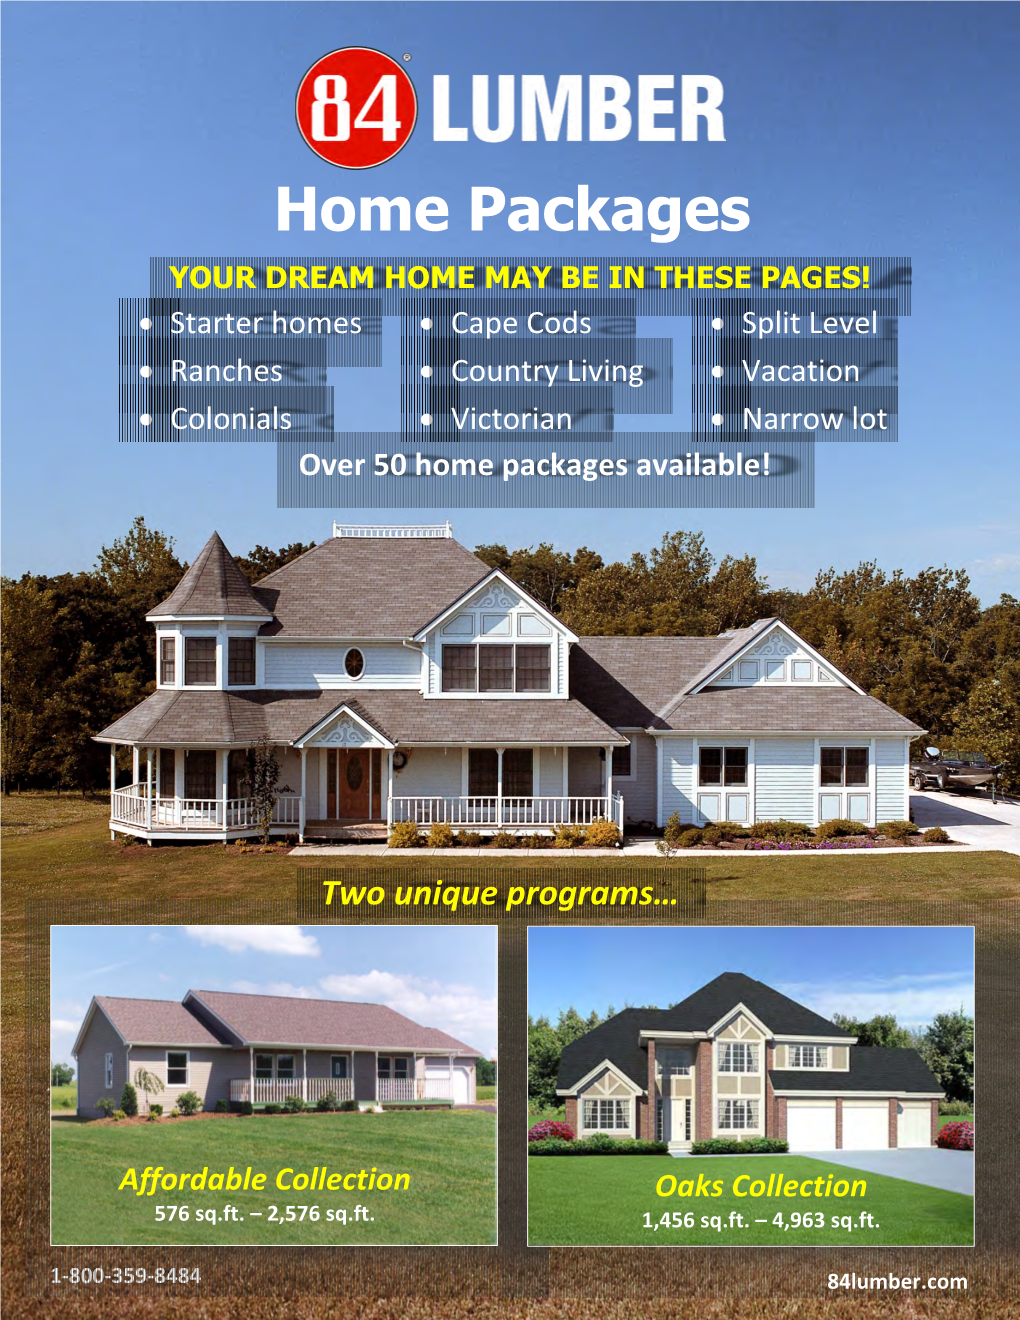 Home Packages